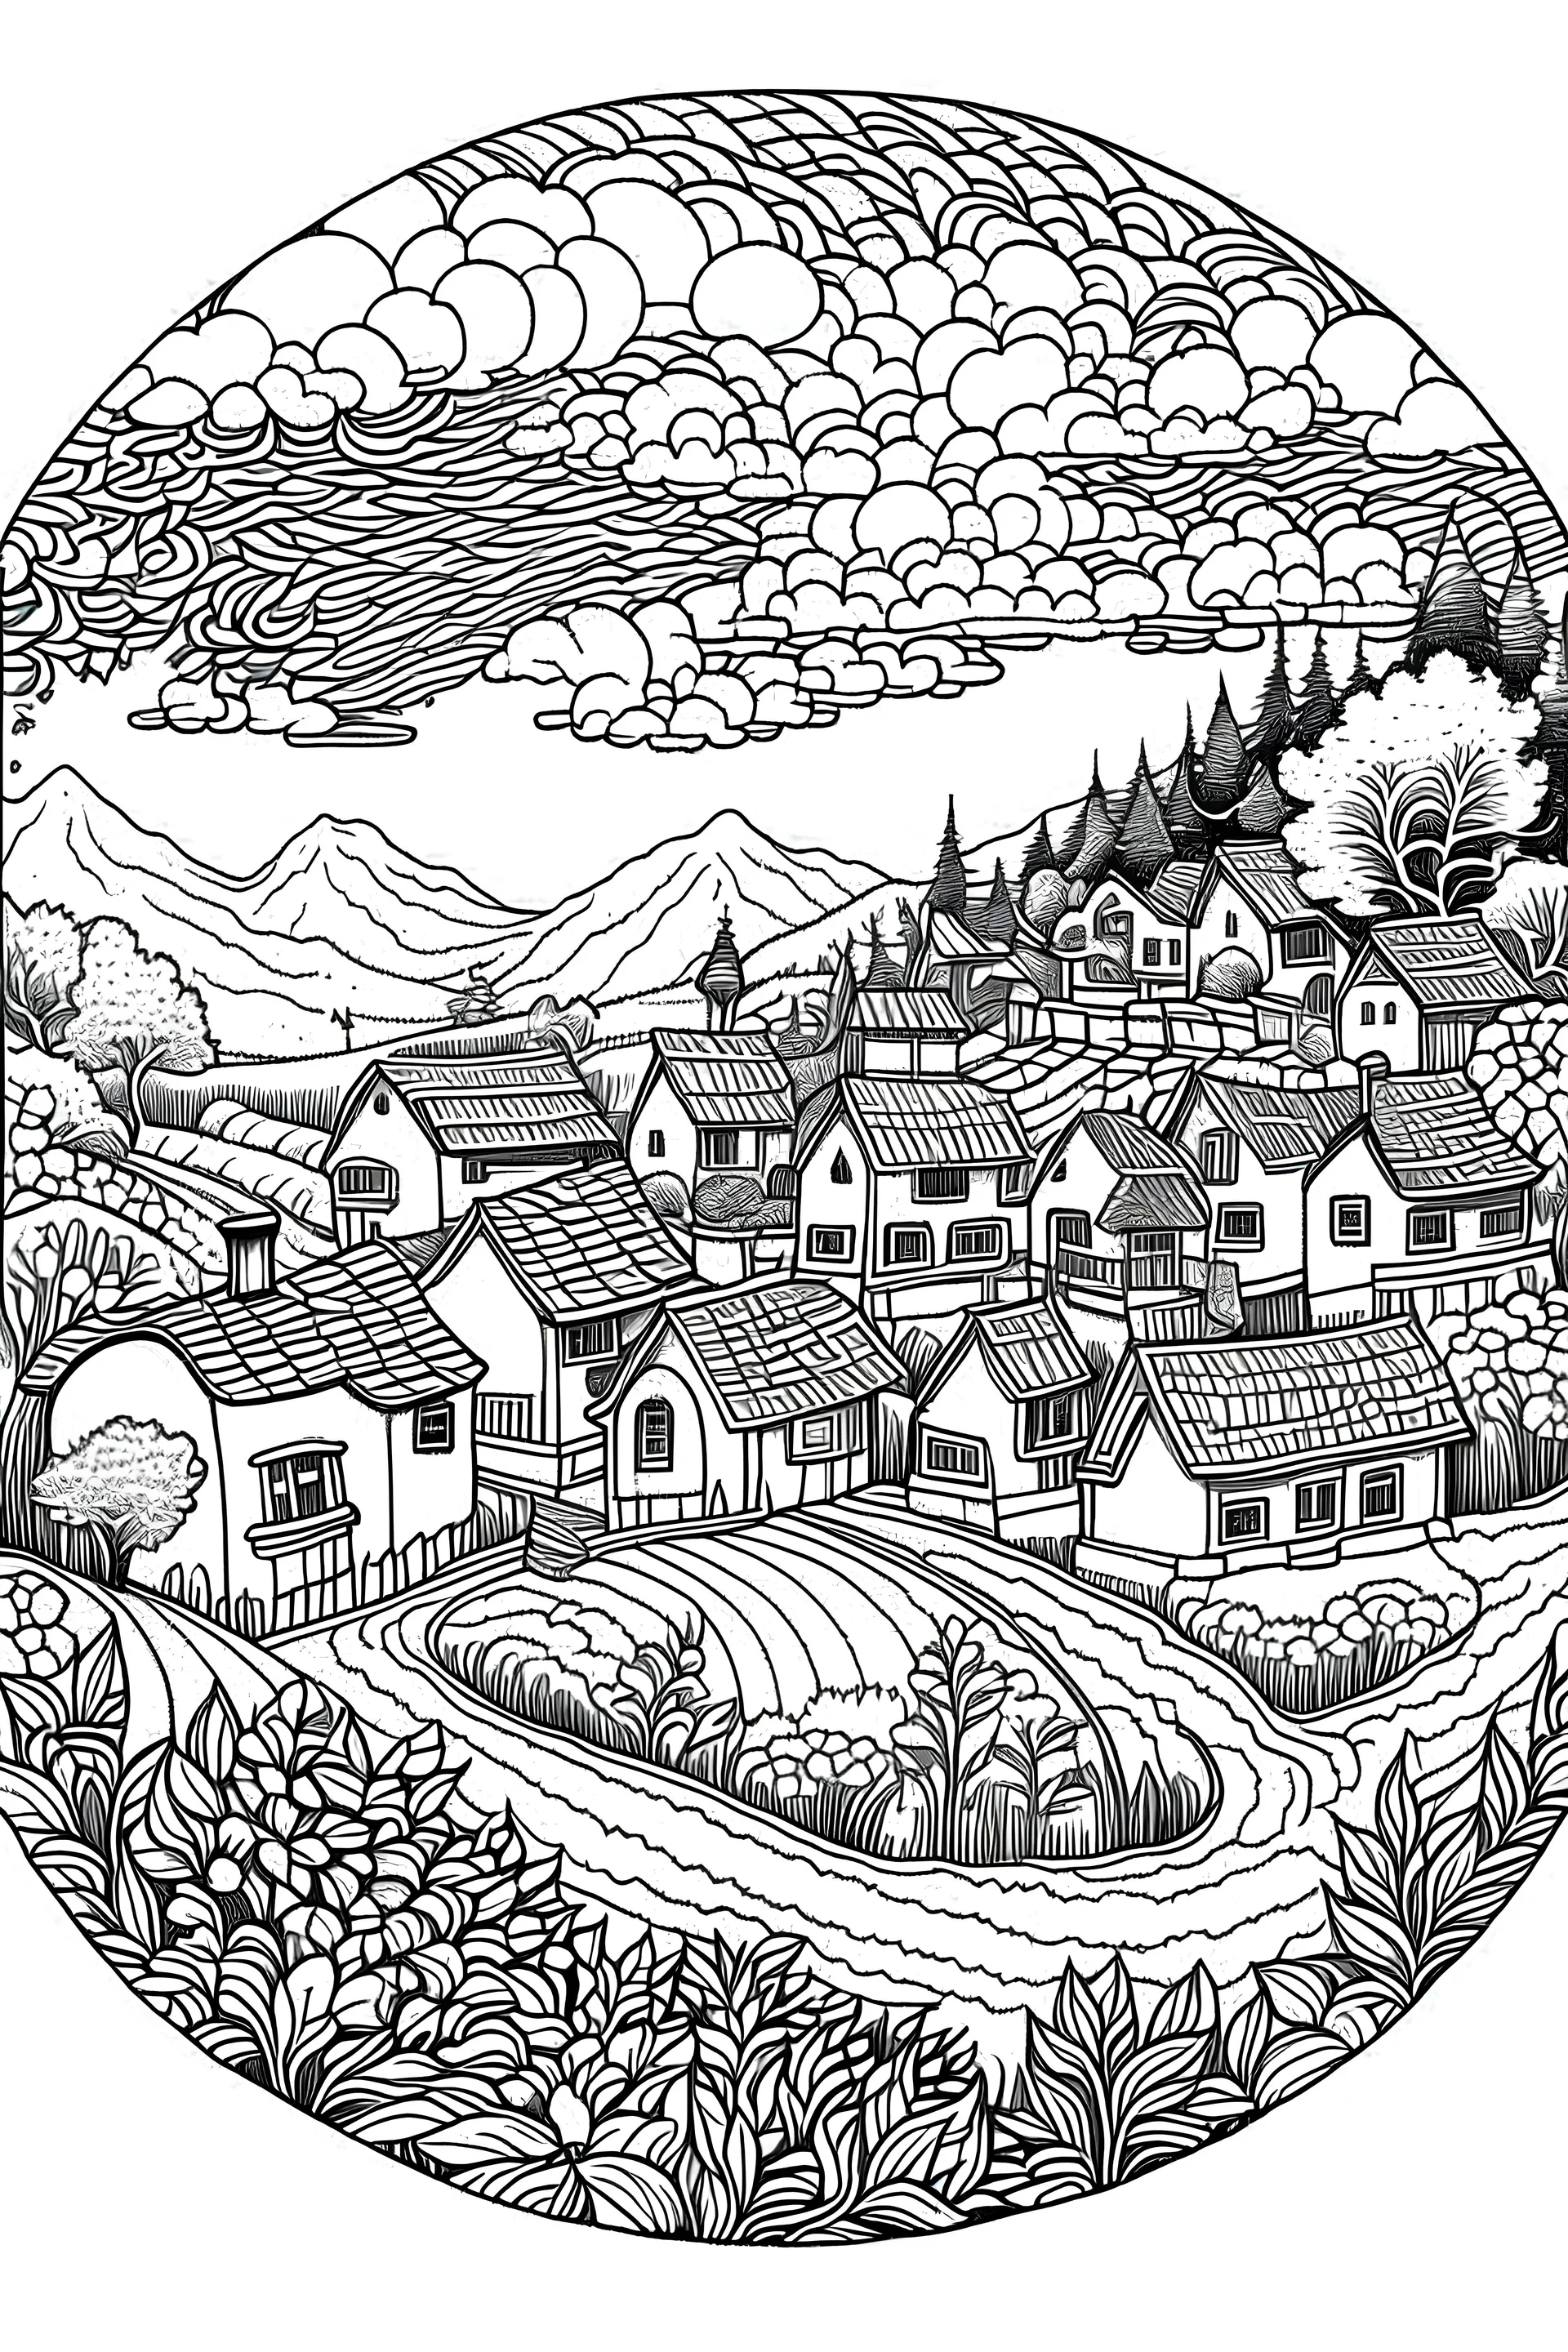 b/w coloring page. village on valley landscape. white background. mandala style